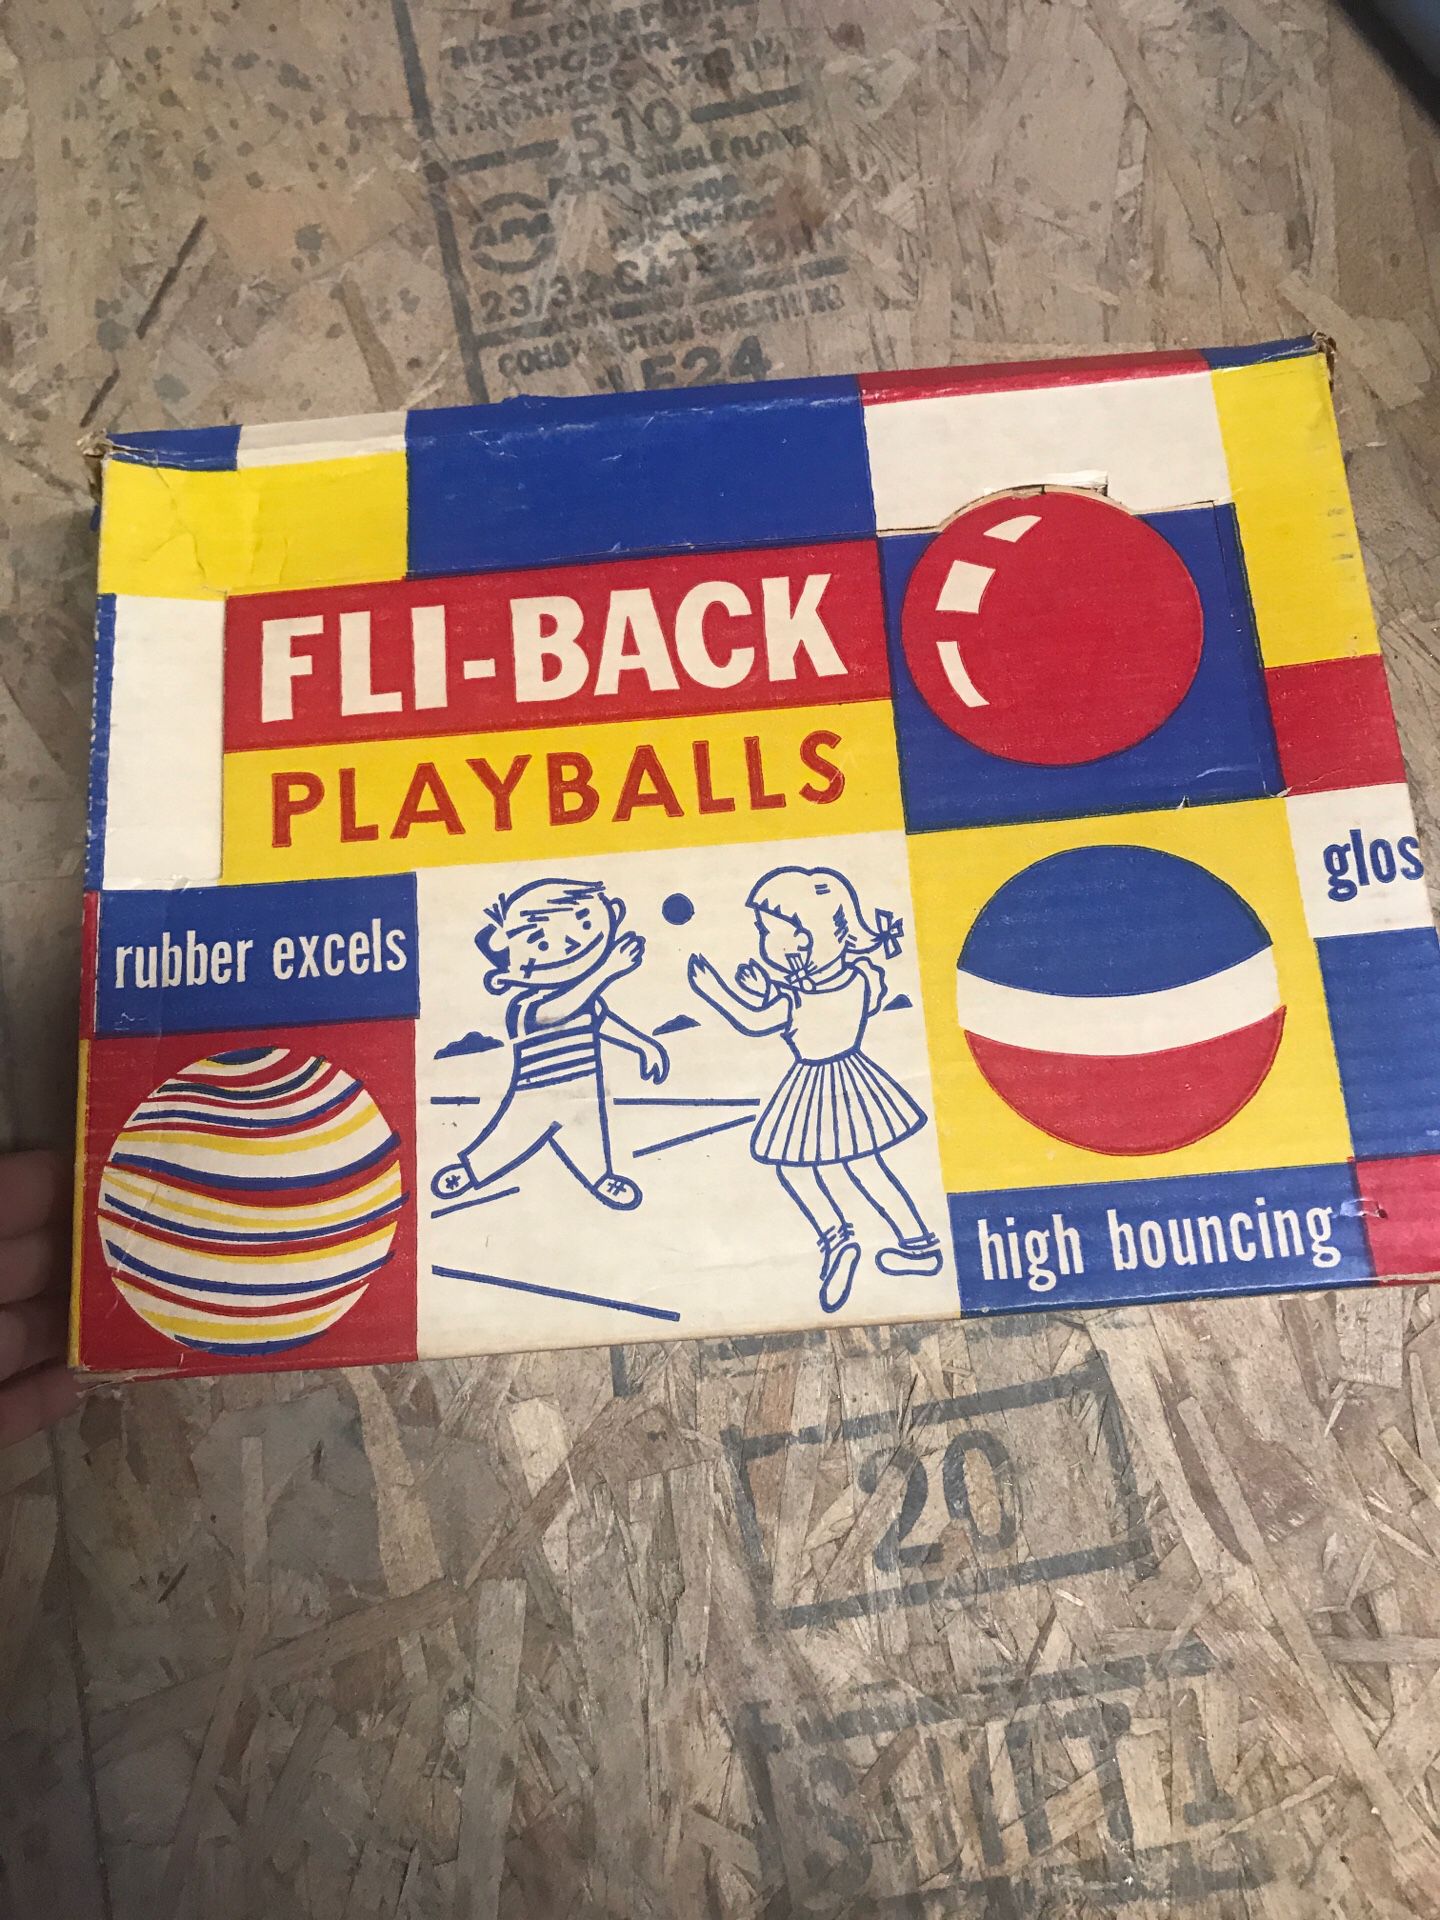 Collectible toy balls